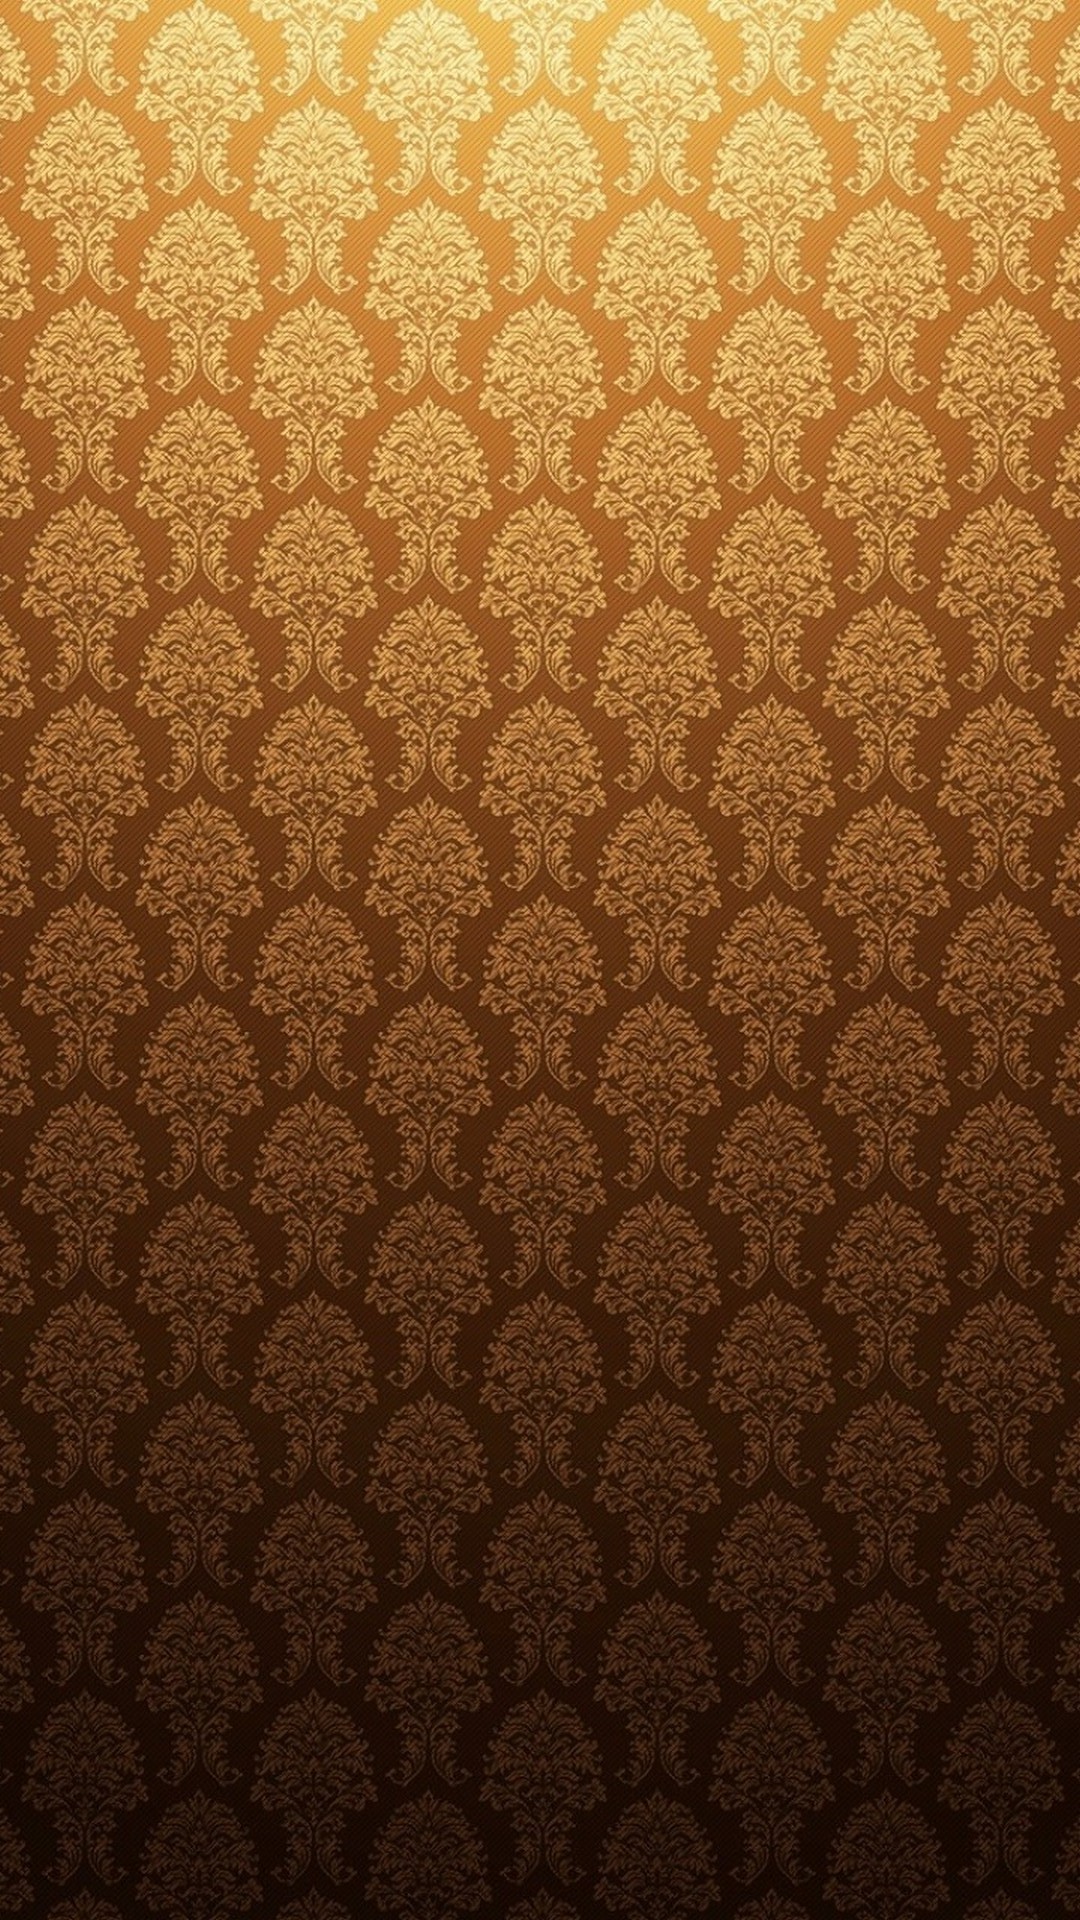 Wallpaper Gold Pattern Android with HD resolution 1080x1920